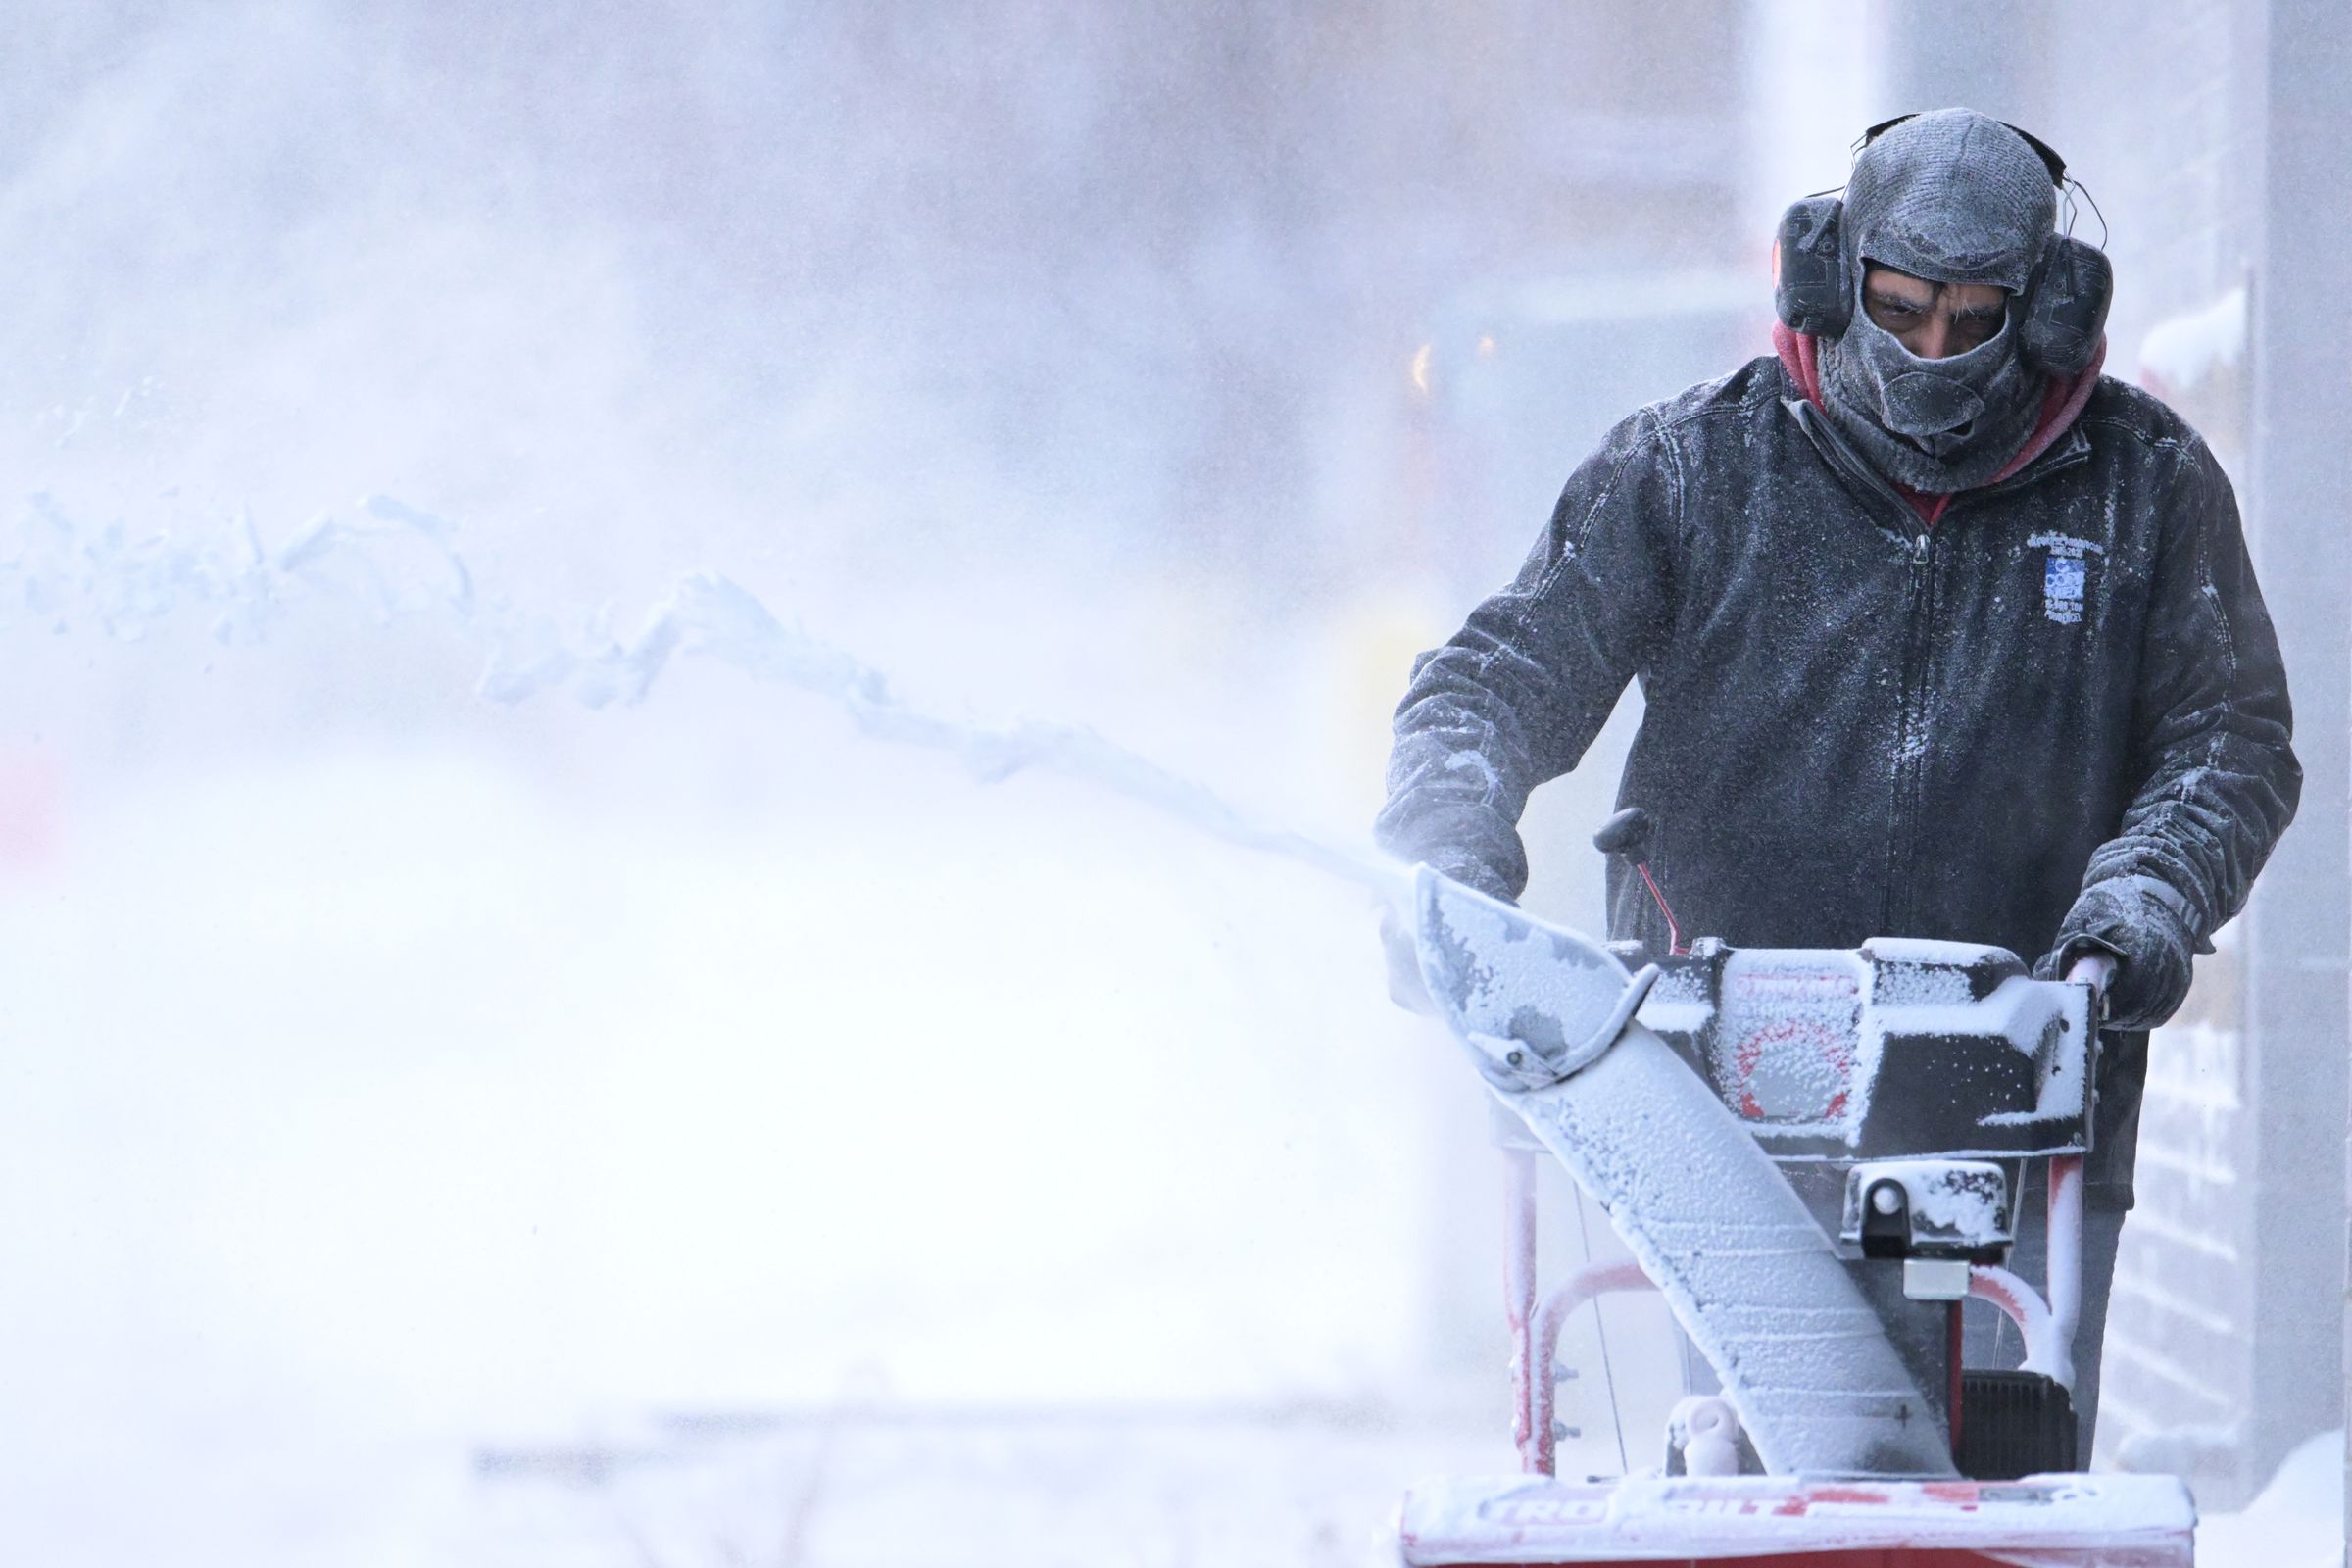 A bundled-up person pushes a snow blower